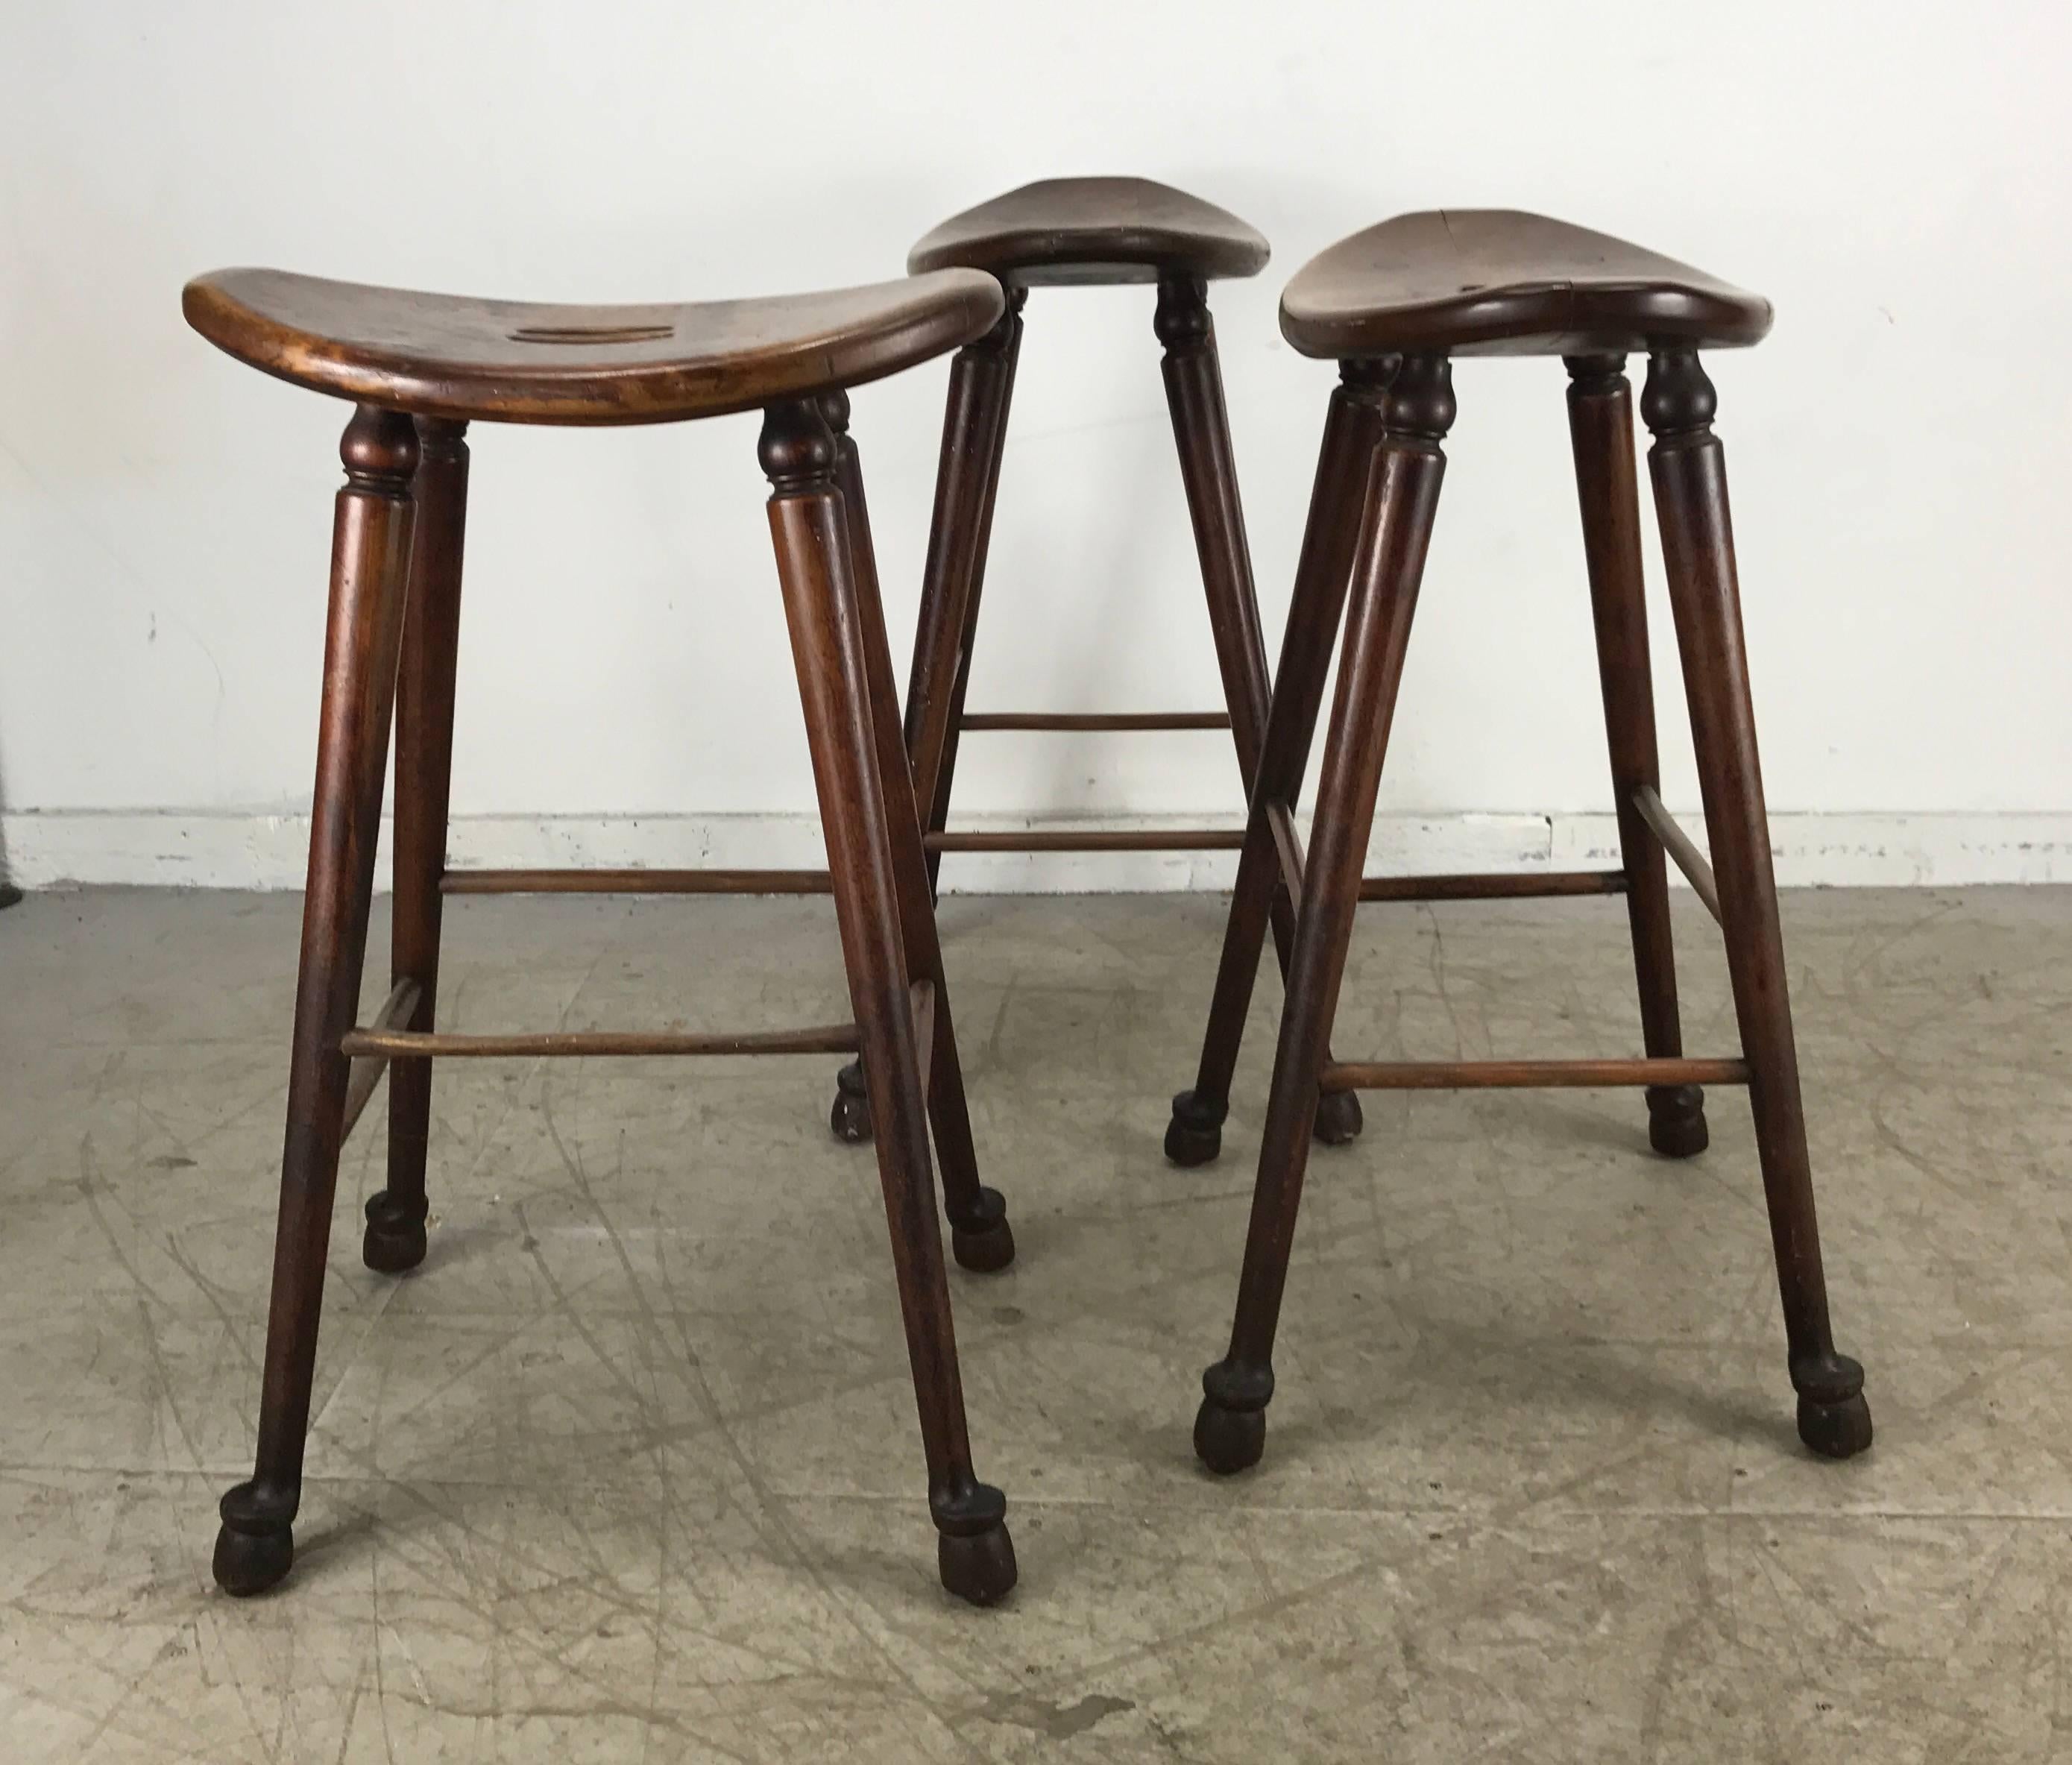 Hand-Crafted Unusual Set of Three Antique Hooved Saloon Stools Bar or Counter Cowboy Modern